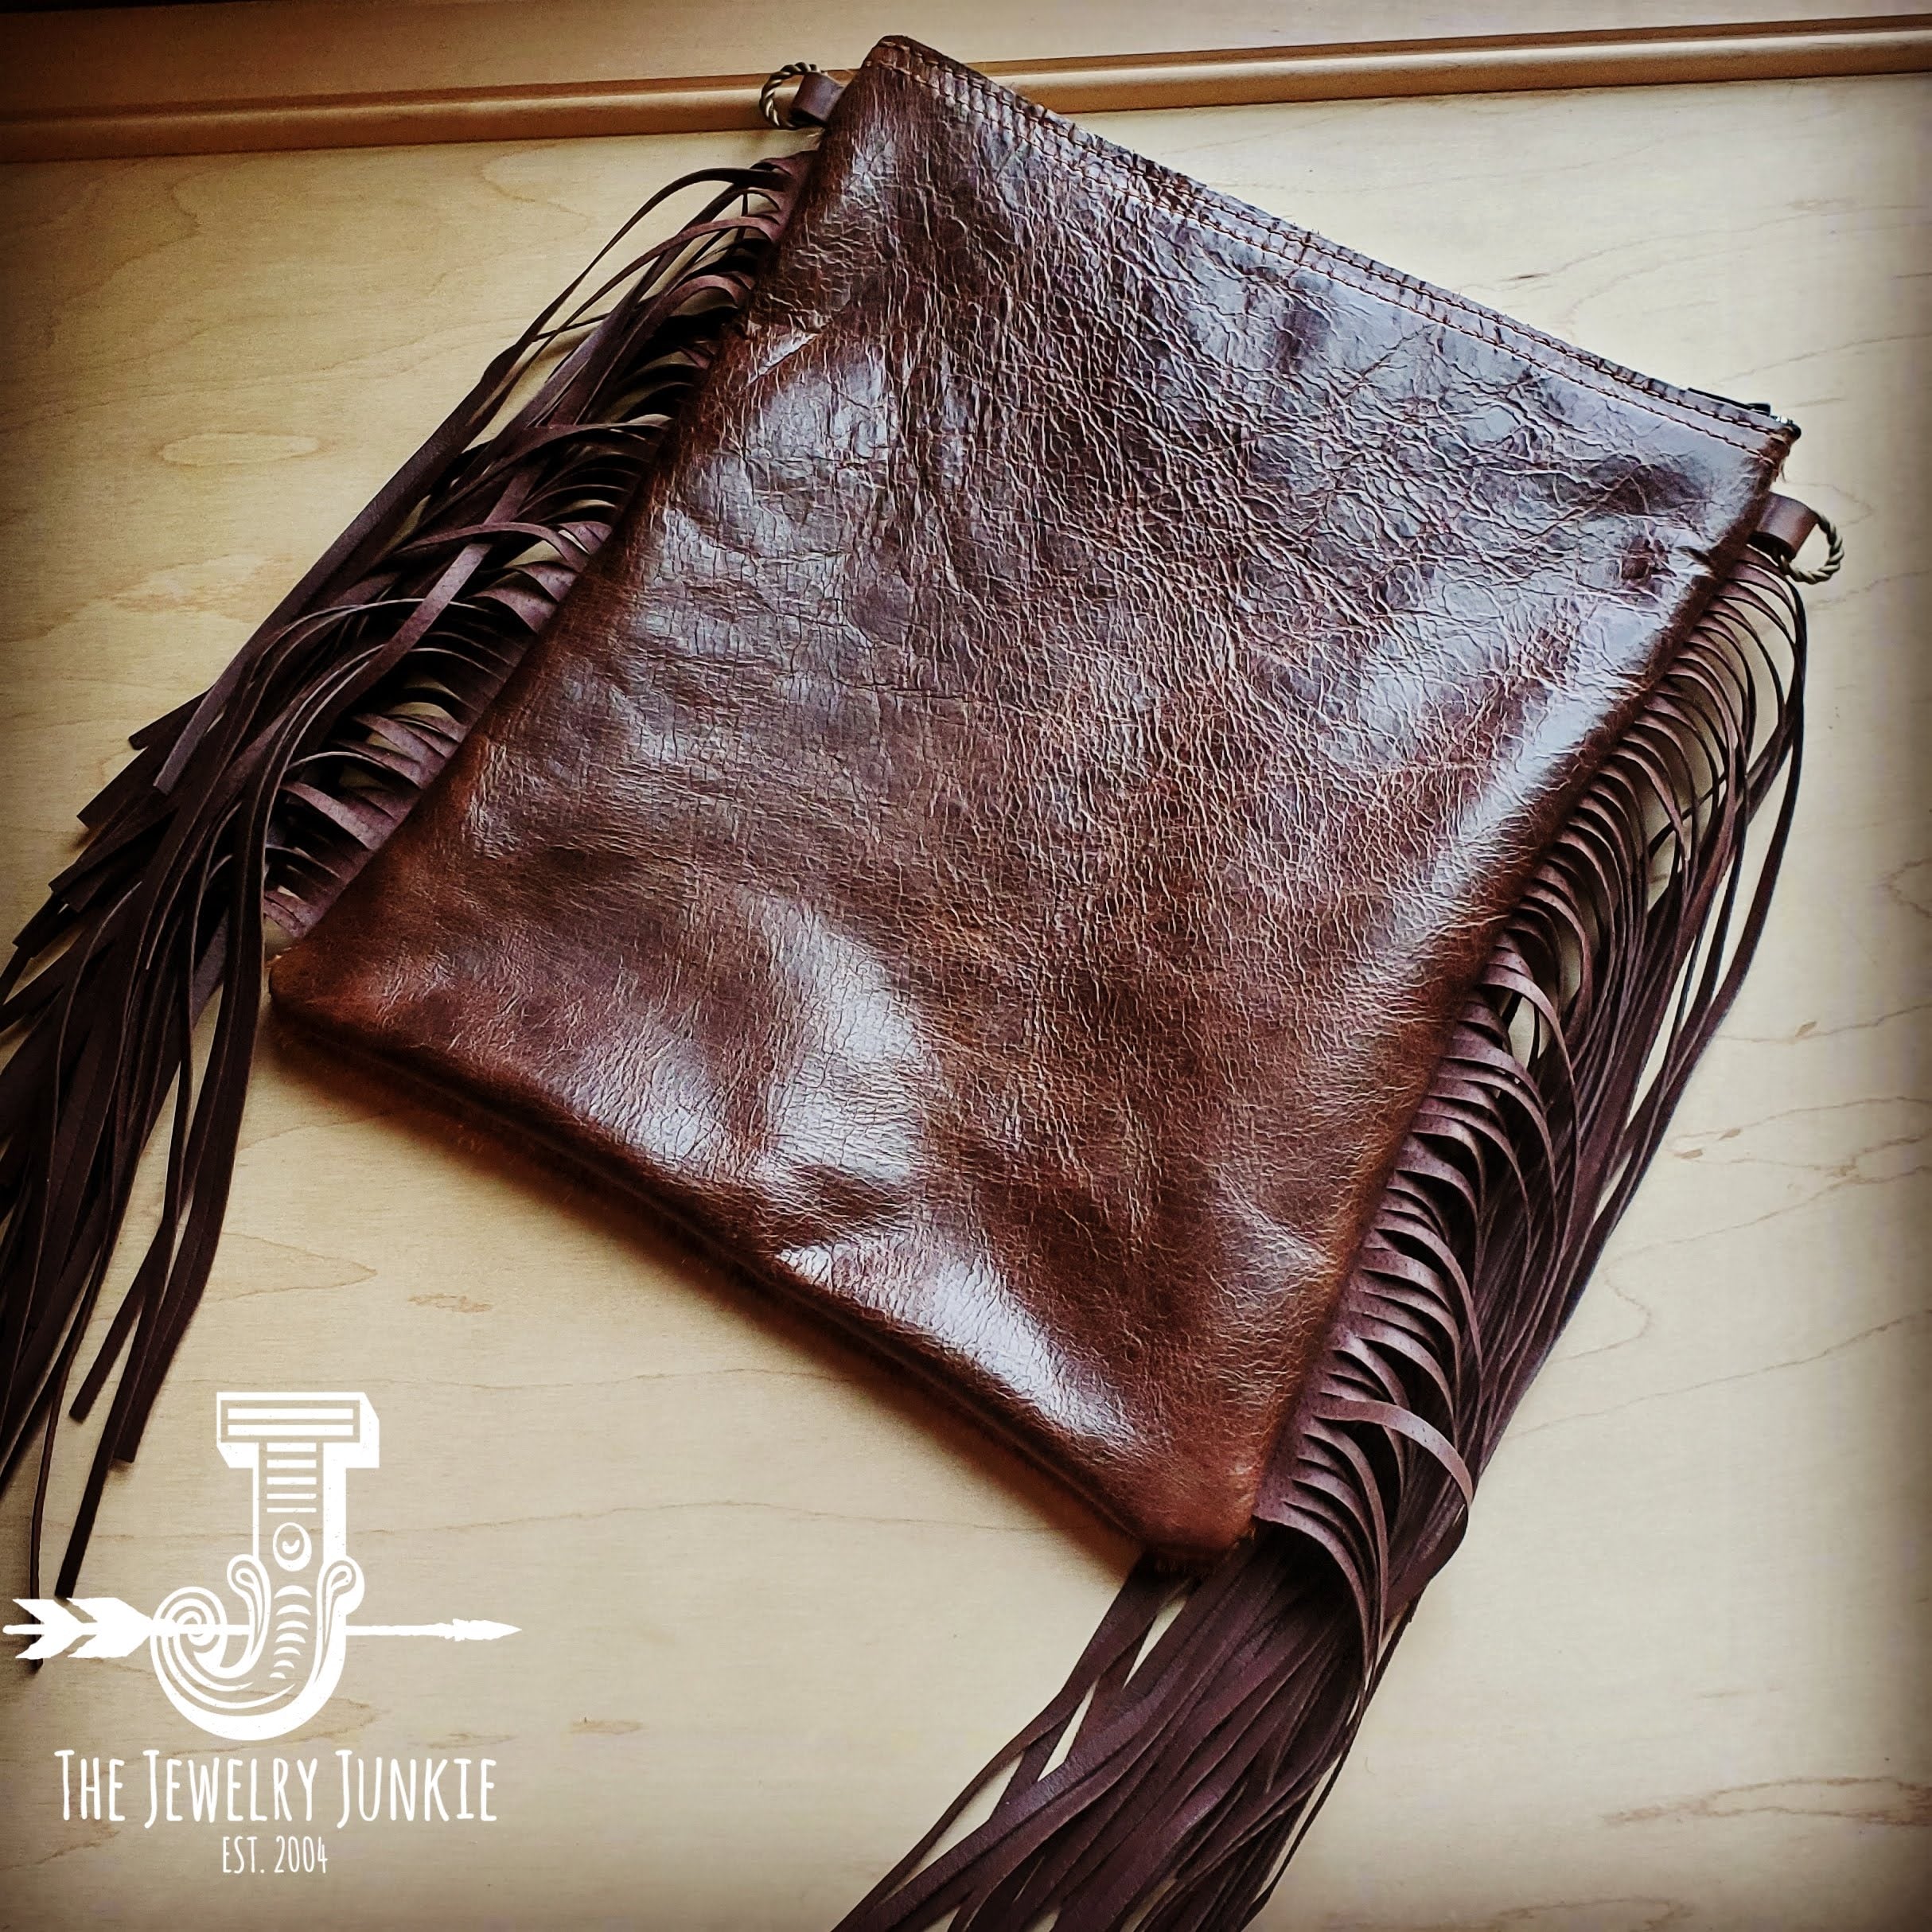 Faux axis deer cowhide bohowestern bag with long black fringe and